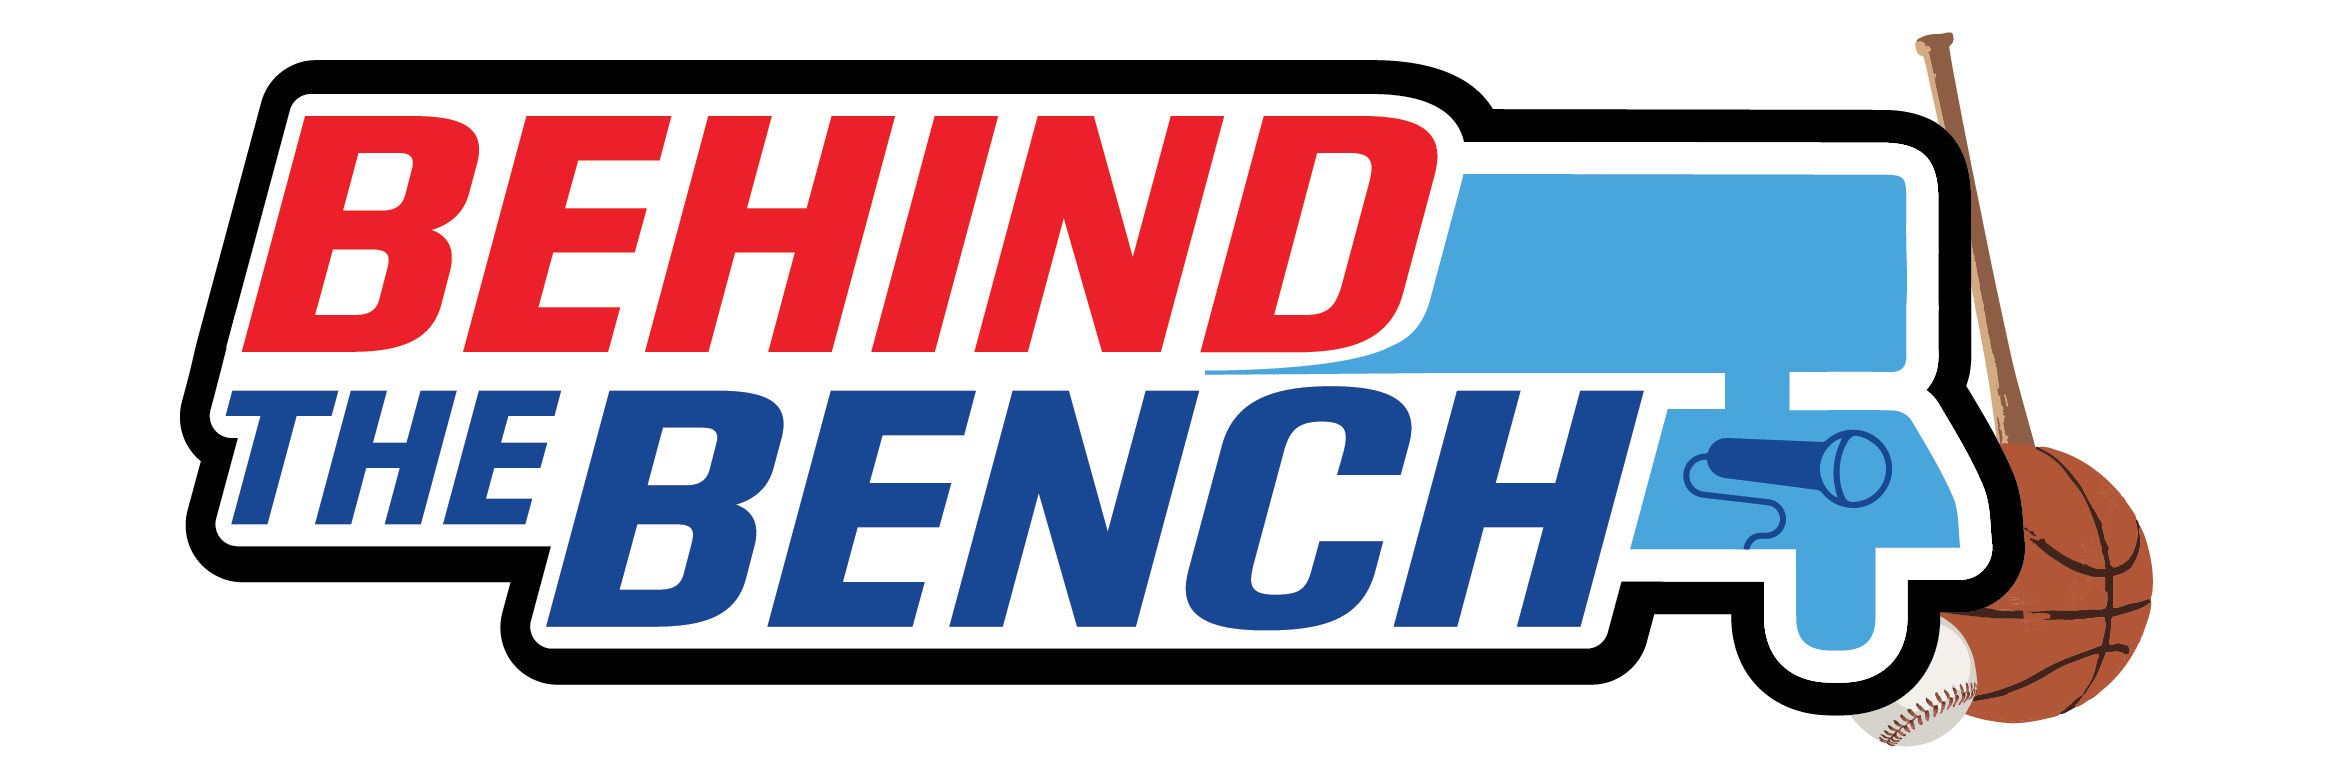 behind-the-bench-logo-png